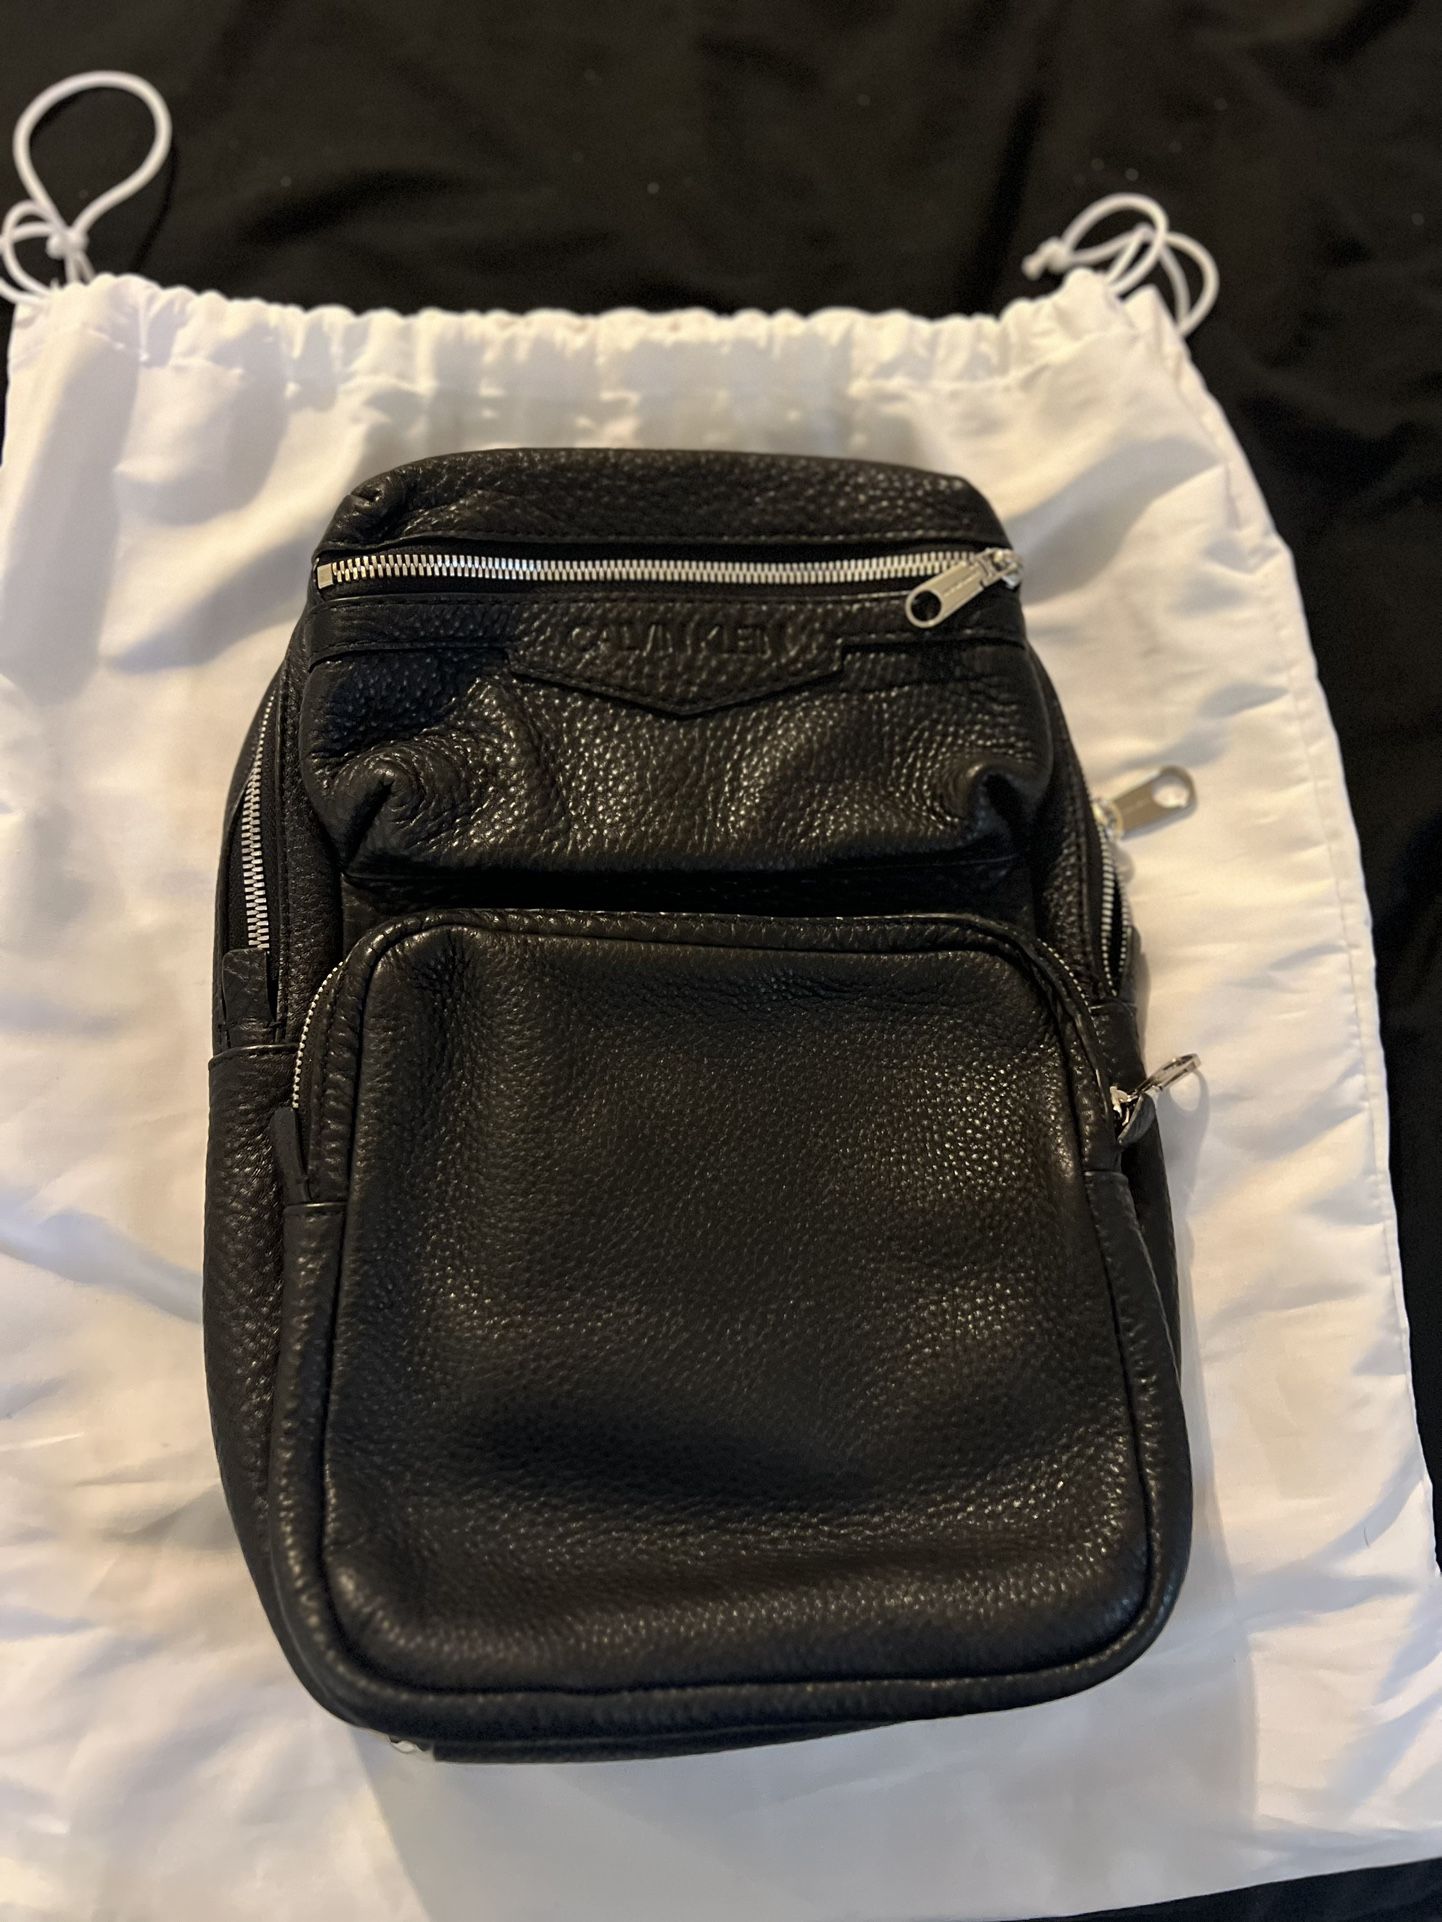 Calvin Klein Jeans Pebbled leather bag